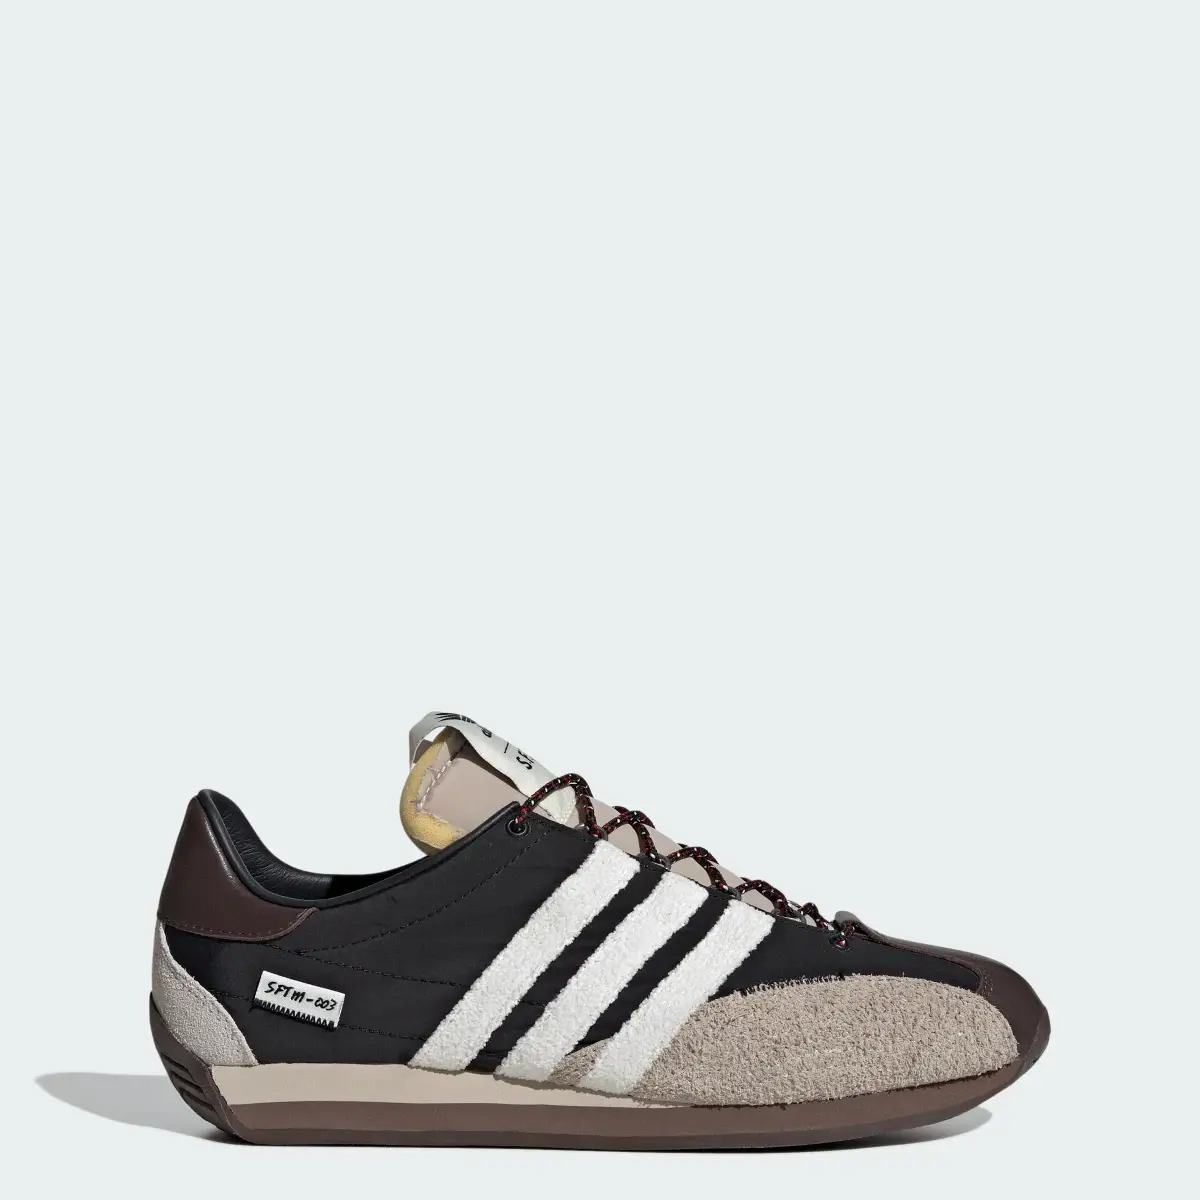 Adidas Country OG Low Trainers. 1